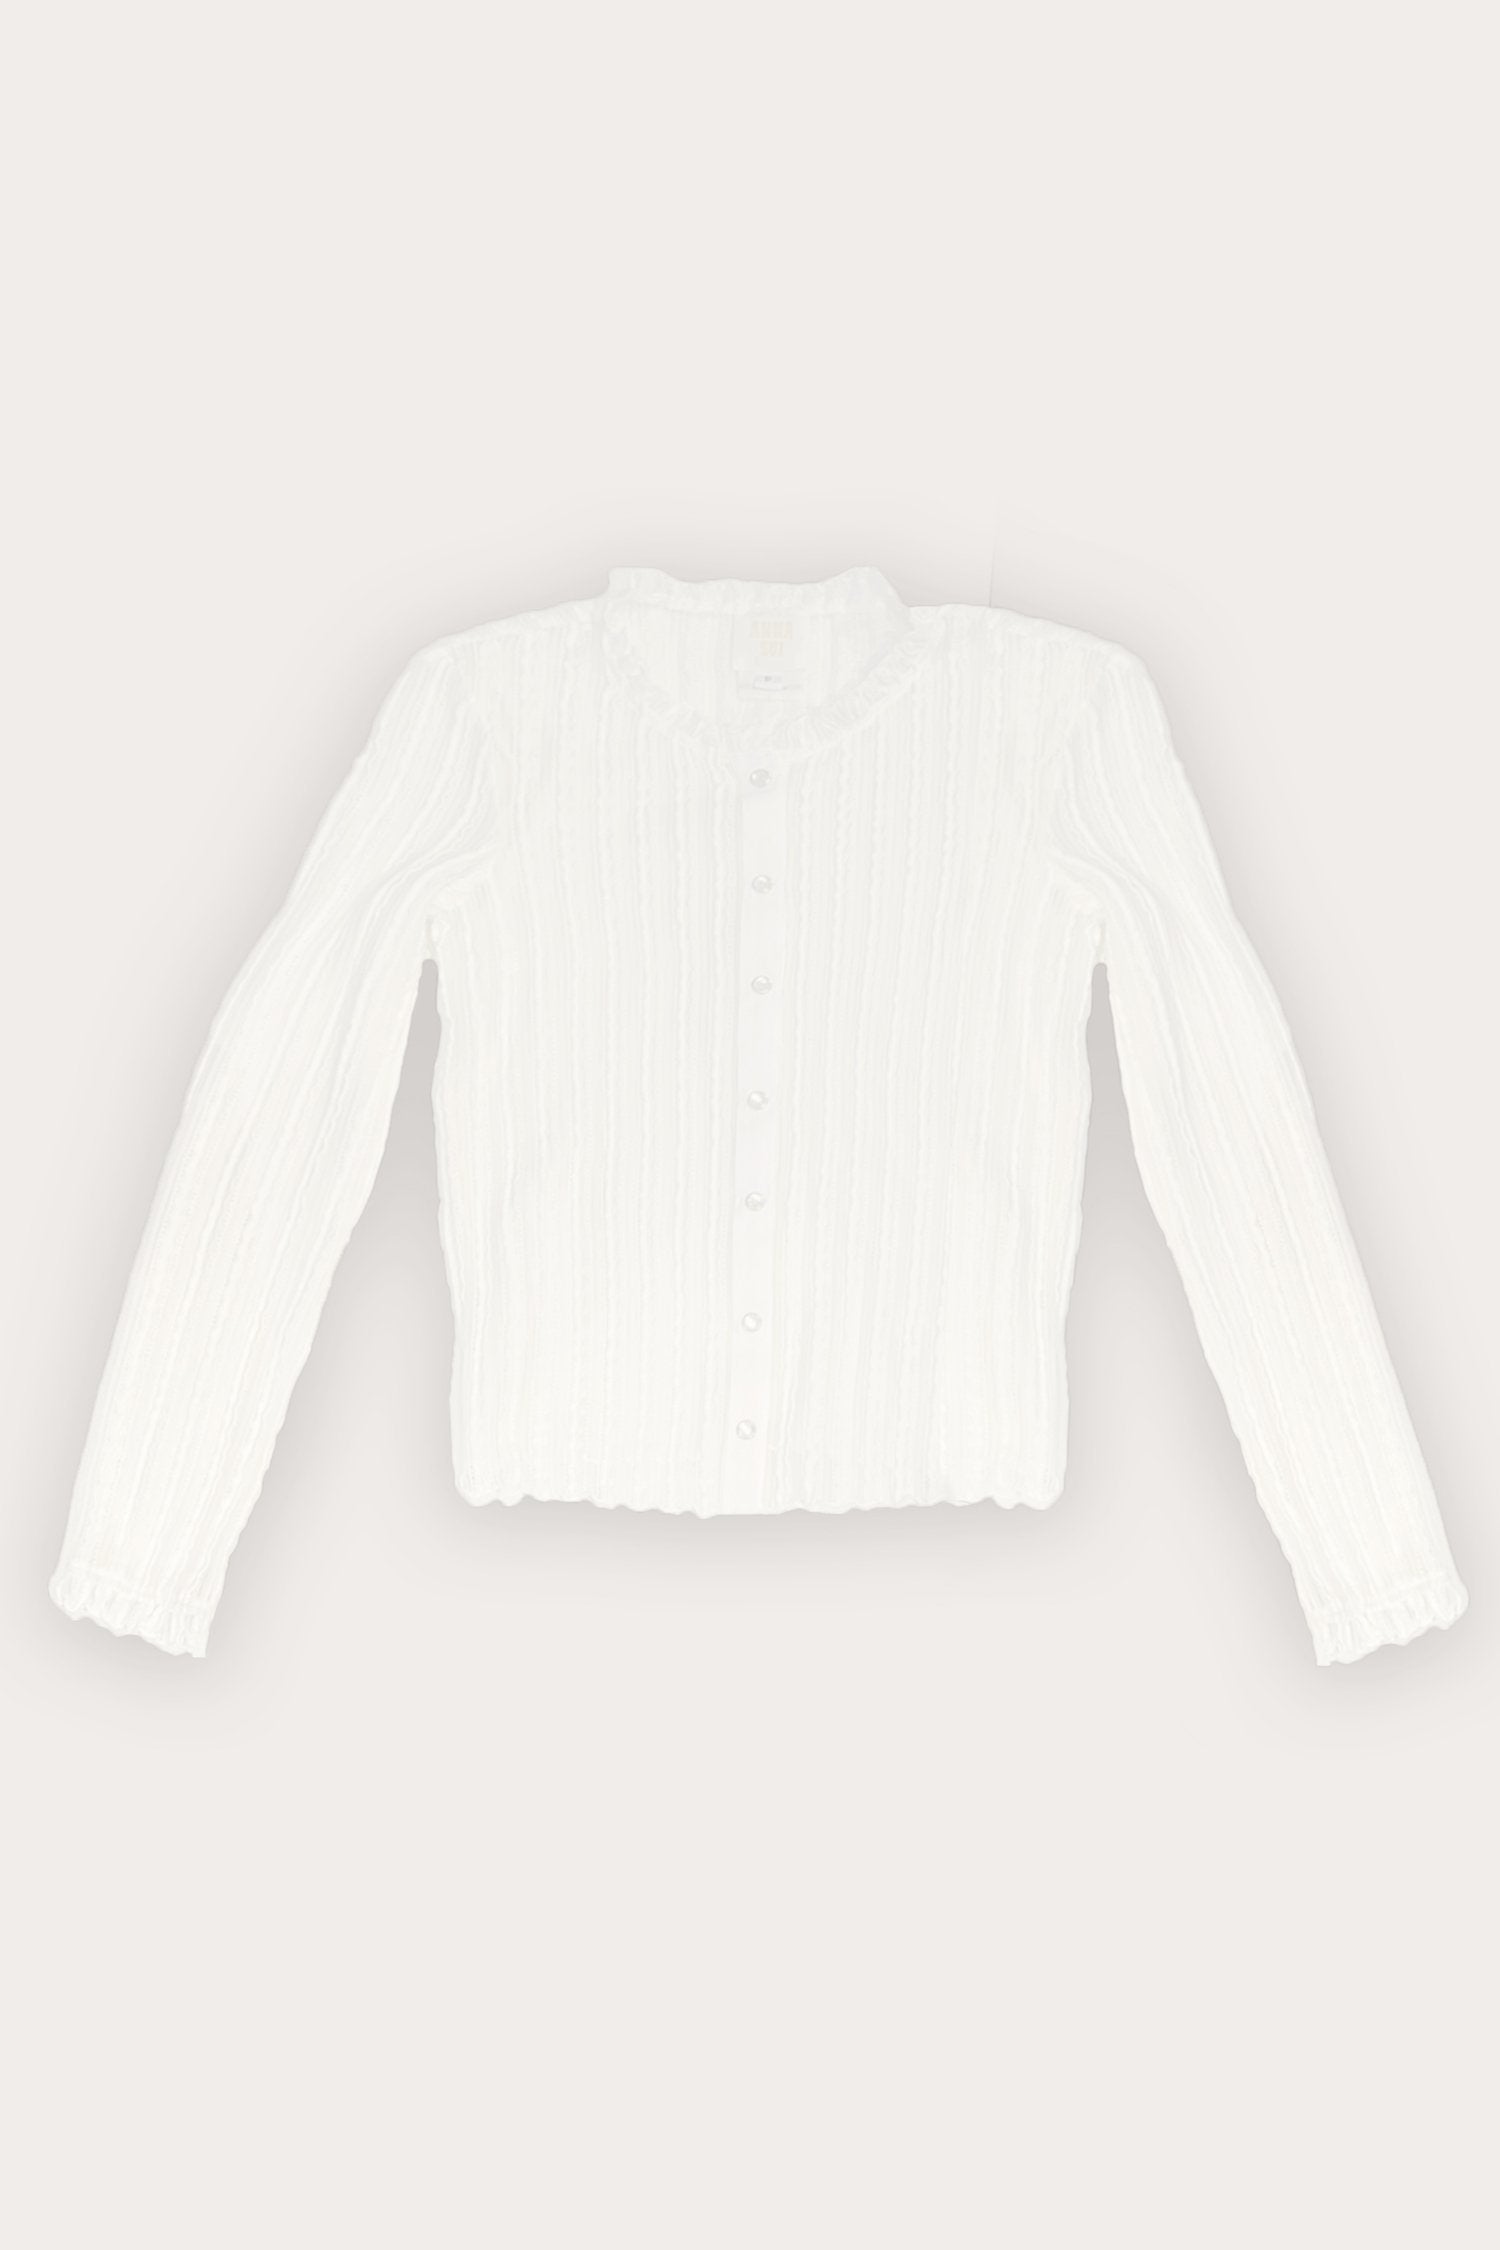 Anna Sui Ruffle Knit Lace Button Top White, ruffles lines effect 